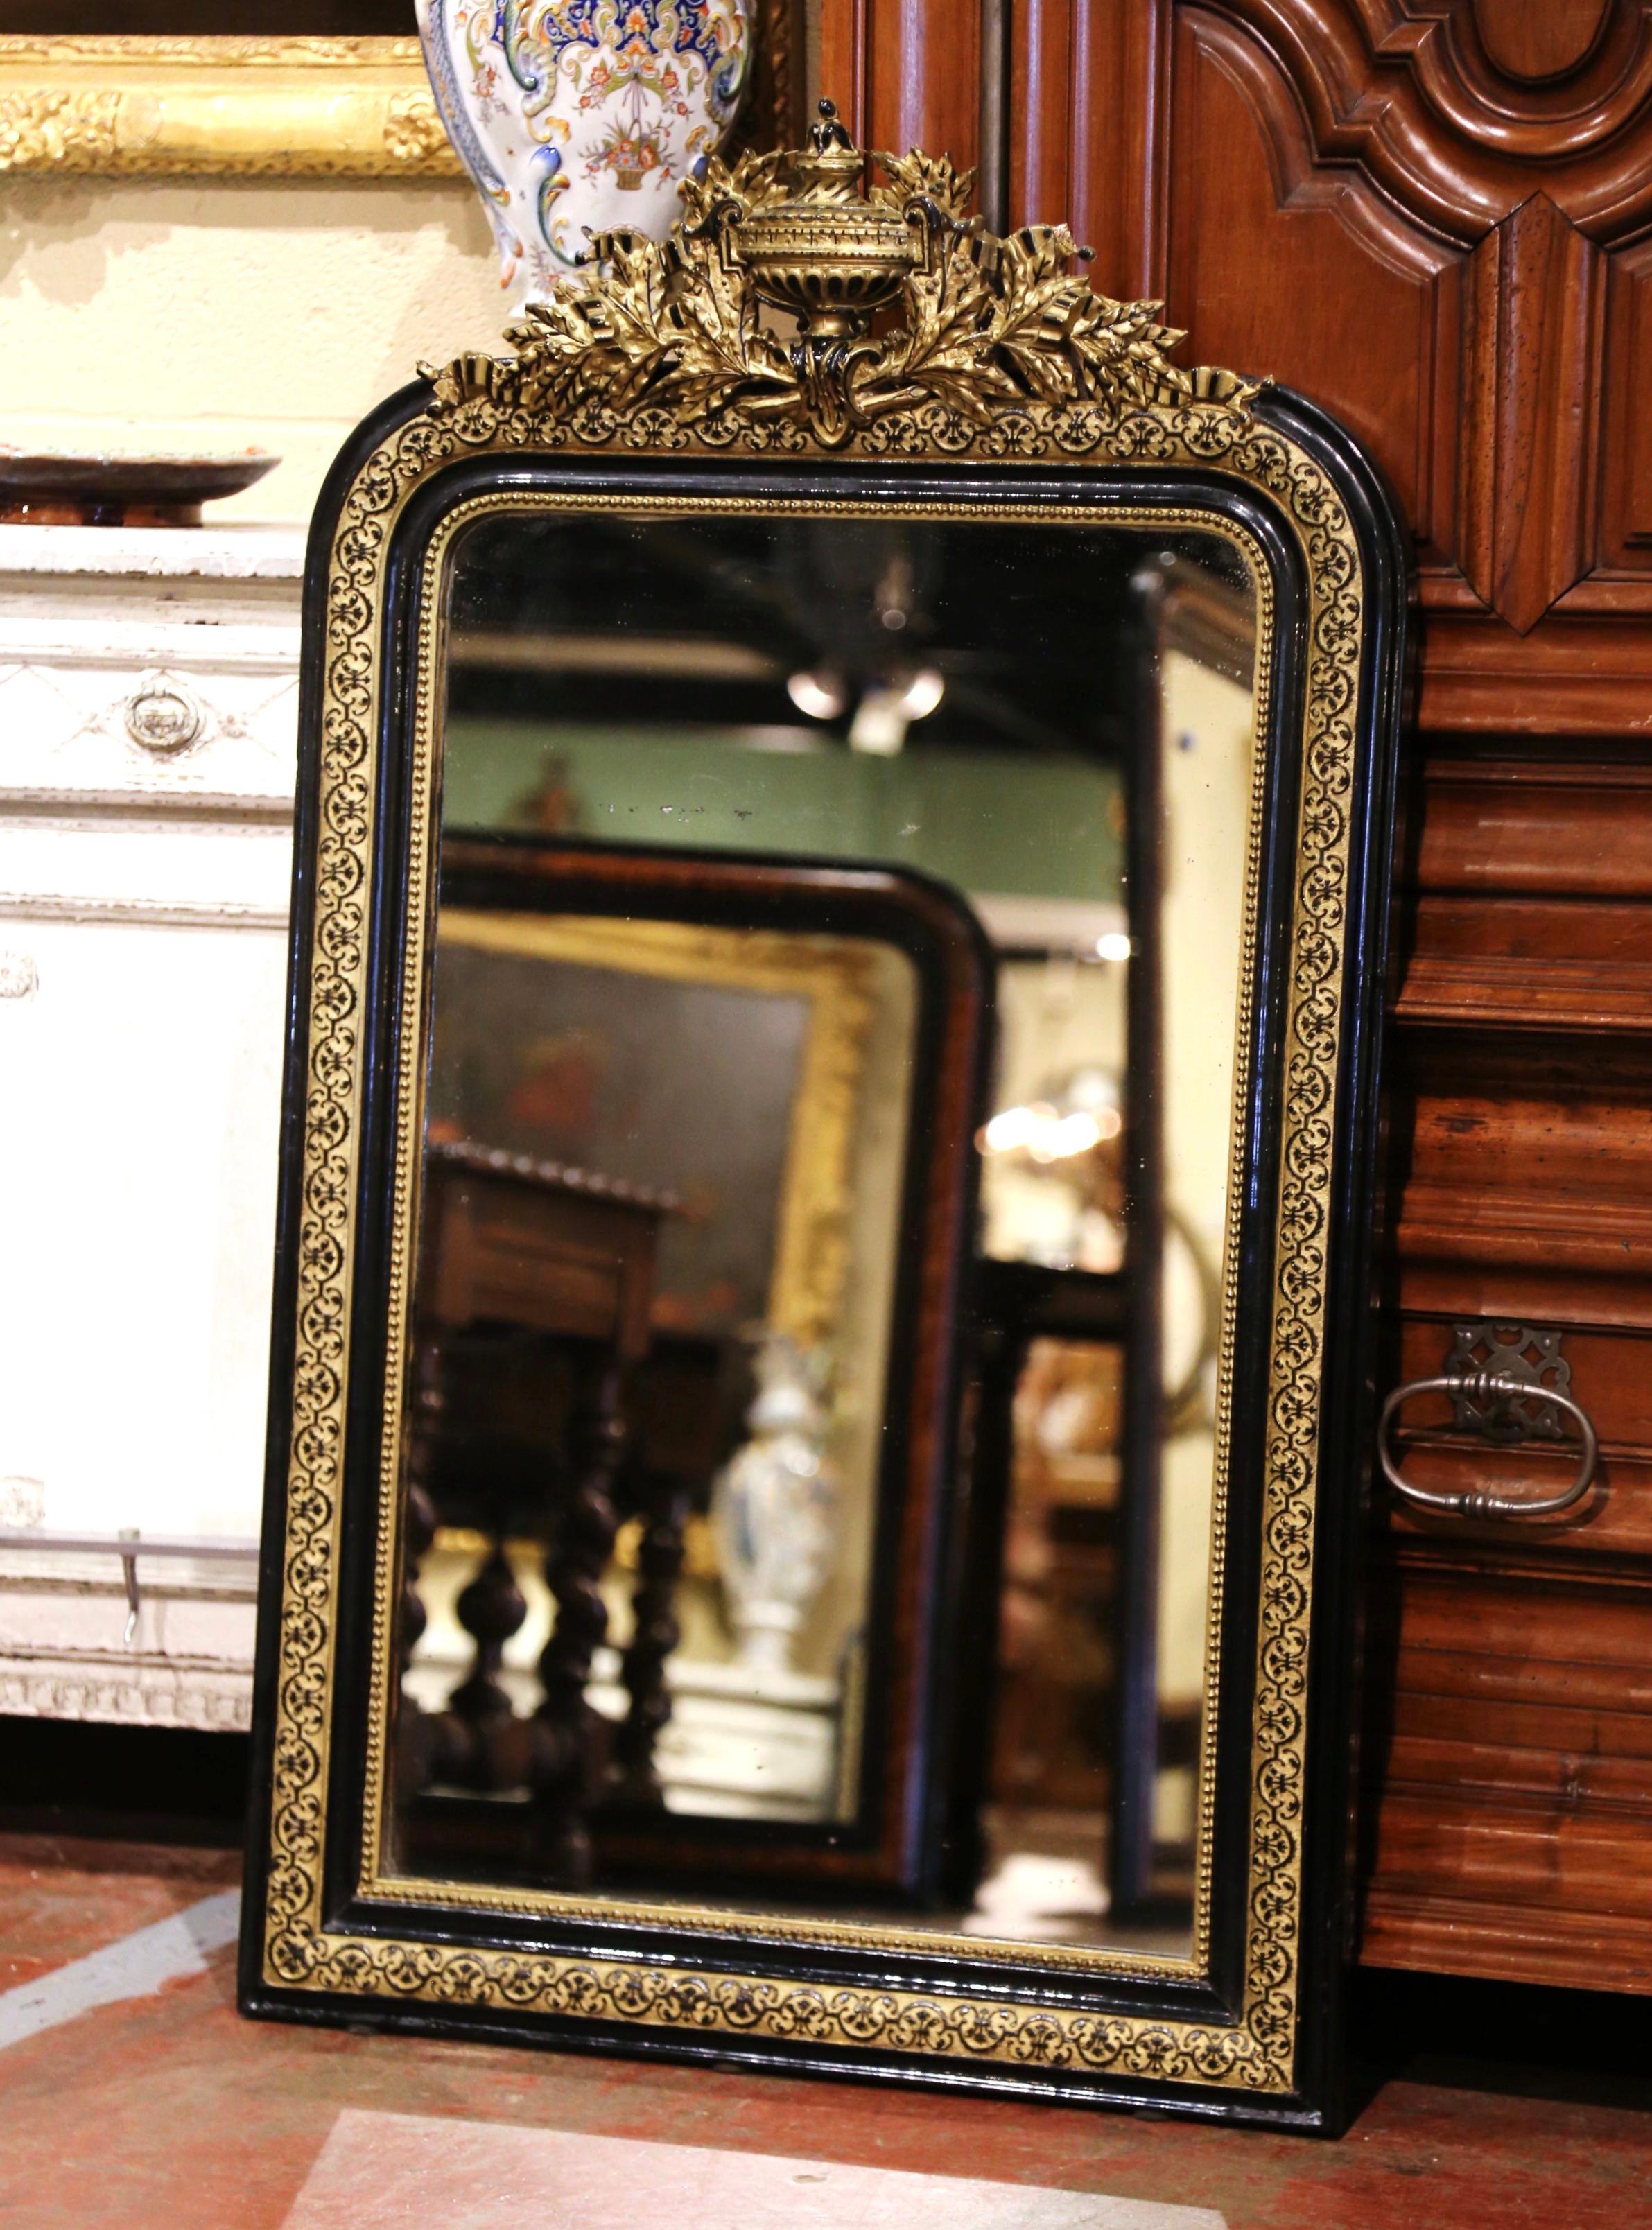 This elegant, antique wall mirror was crafted in France, circa 1880. The mirror is decorated at the pediment with a large cartouche vase in the center flanked with carved floral and leaf motifs on both sides. The two-tone gilt and blackened frame,